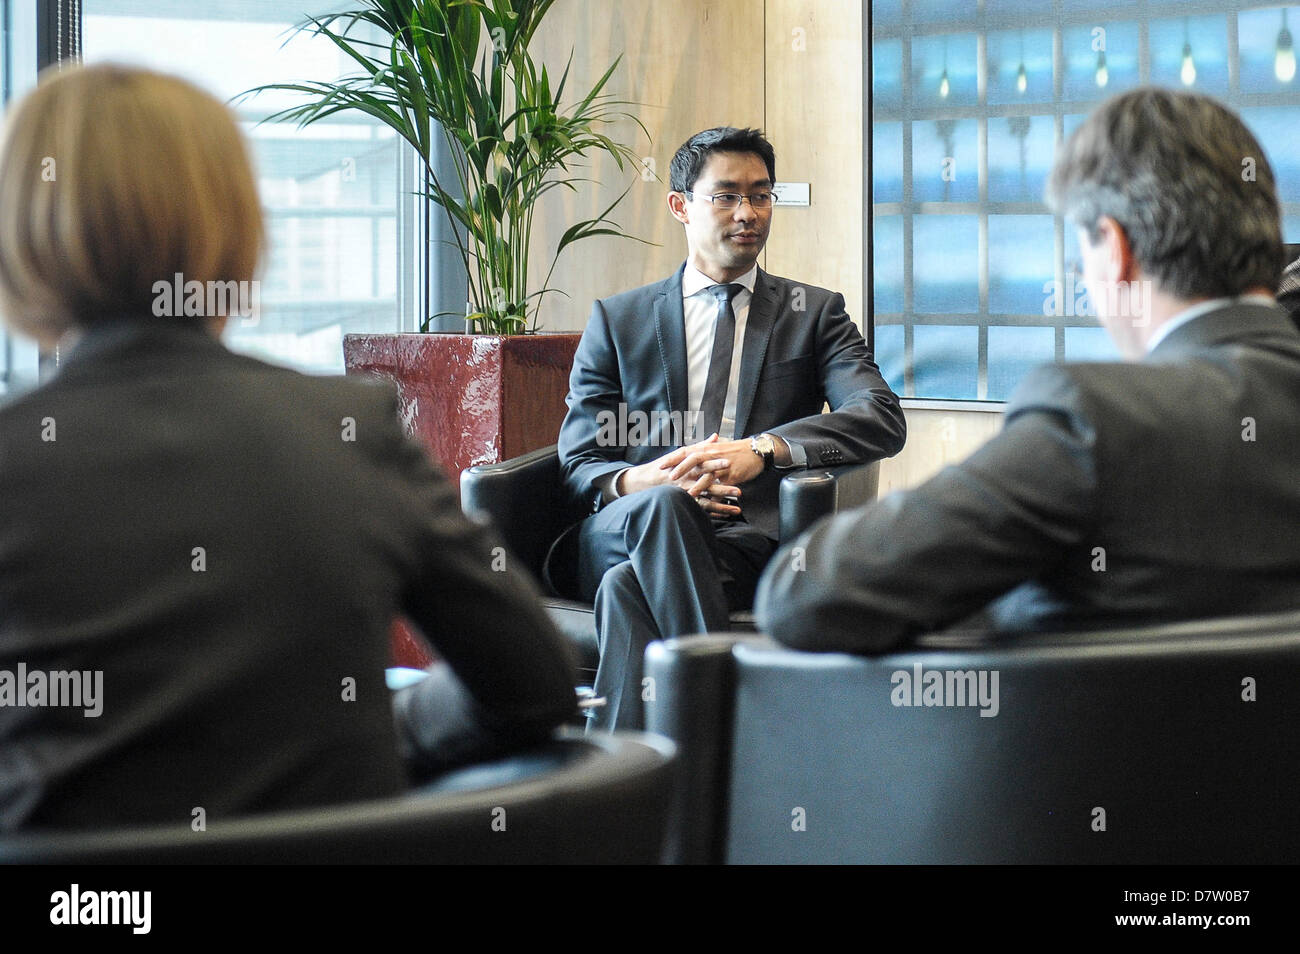 Brussels, Belgium. 14th May 2013. Philipp Rösler, economic affairs minister and Vice-Chancellor of Germany prior to the meeting at European Commission headquarters in Brussels.  by Wiktor Dabkowski/DPA/Alamy Live News Stock Photo